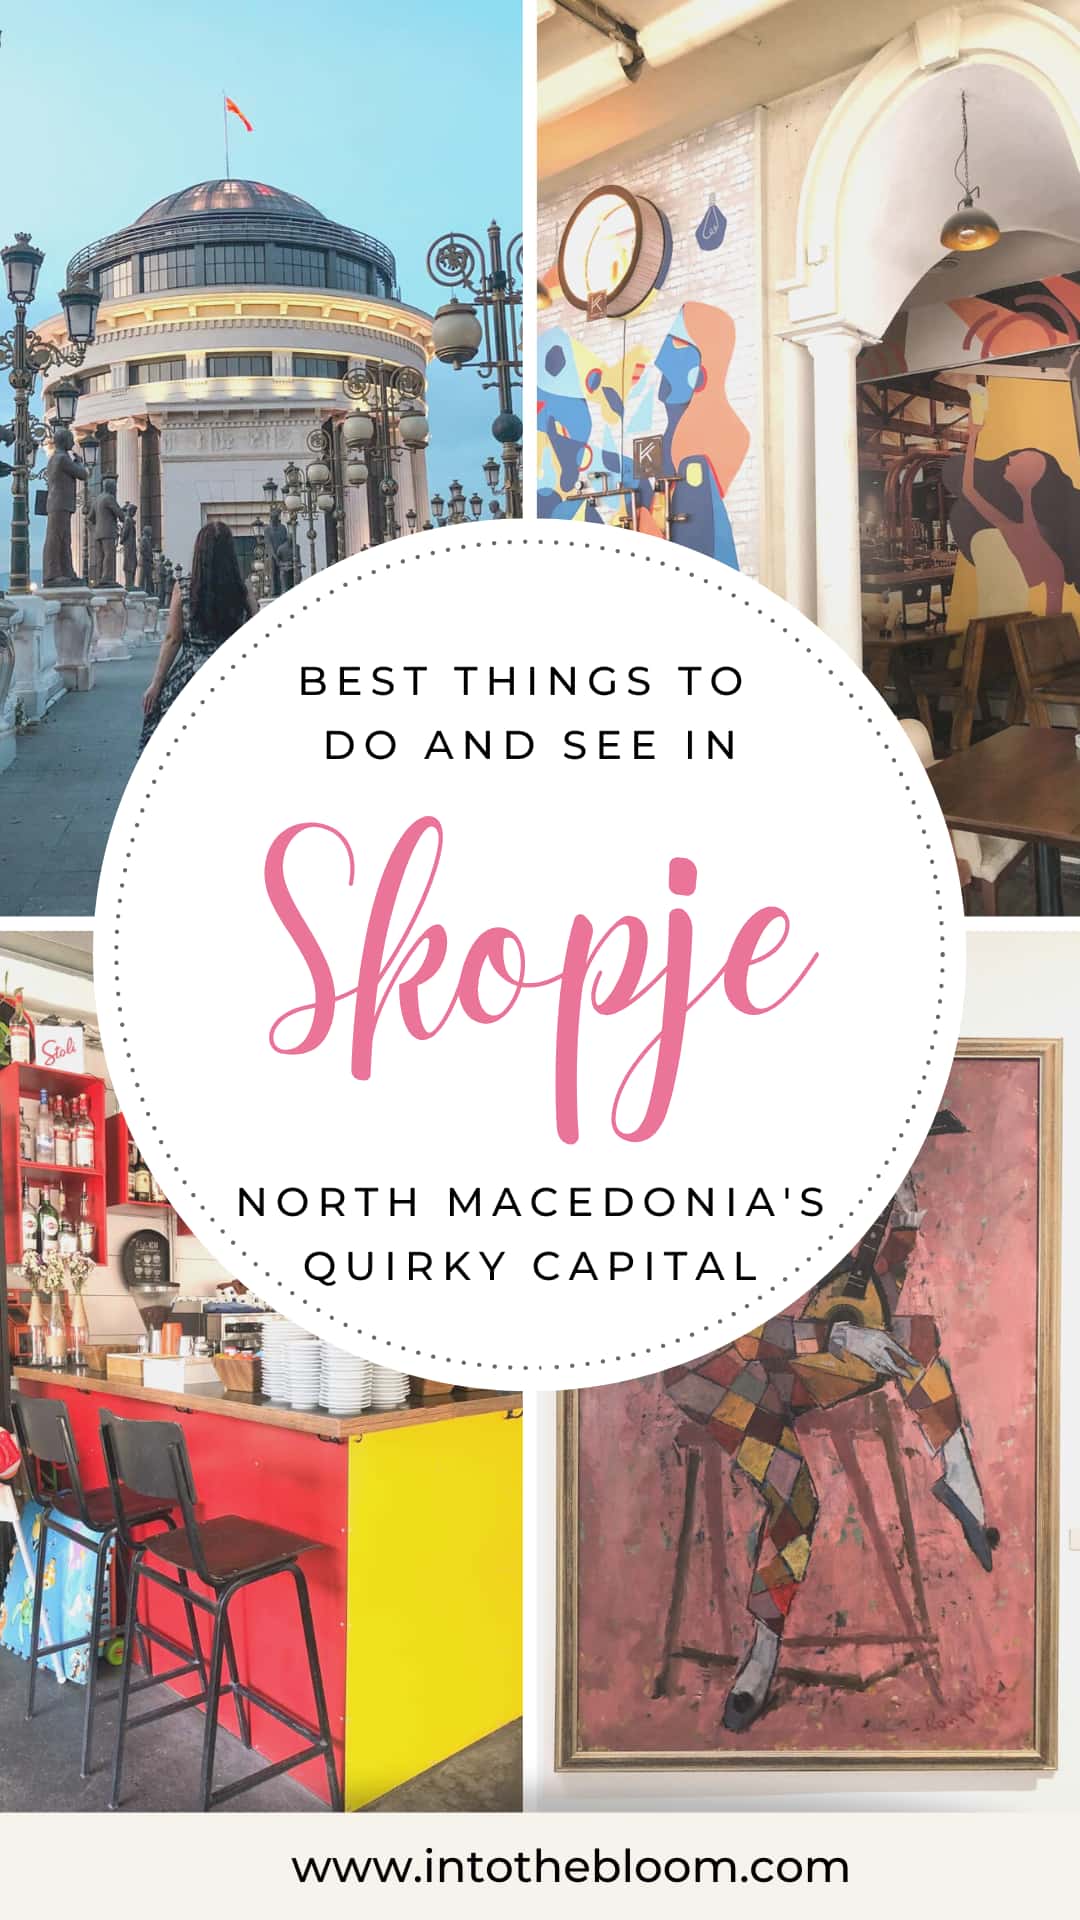 Best things to do and see in Skopje, North Macedonia's quirky capital